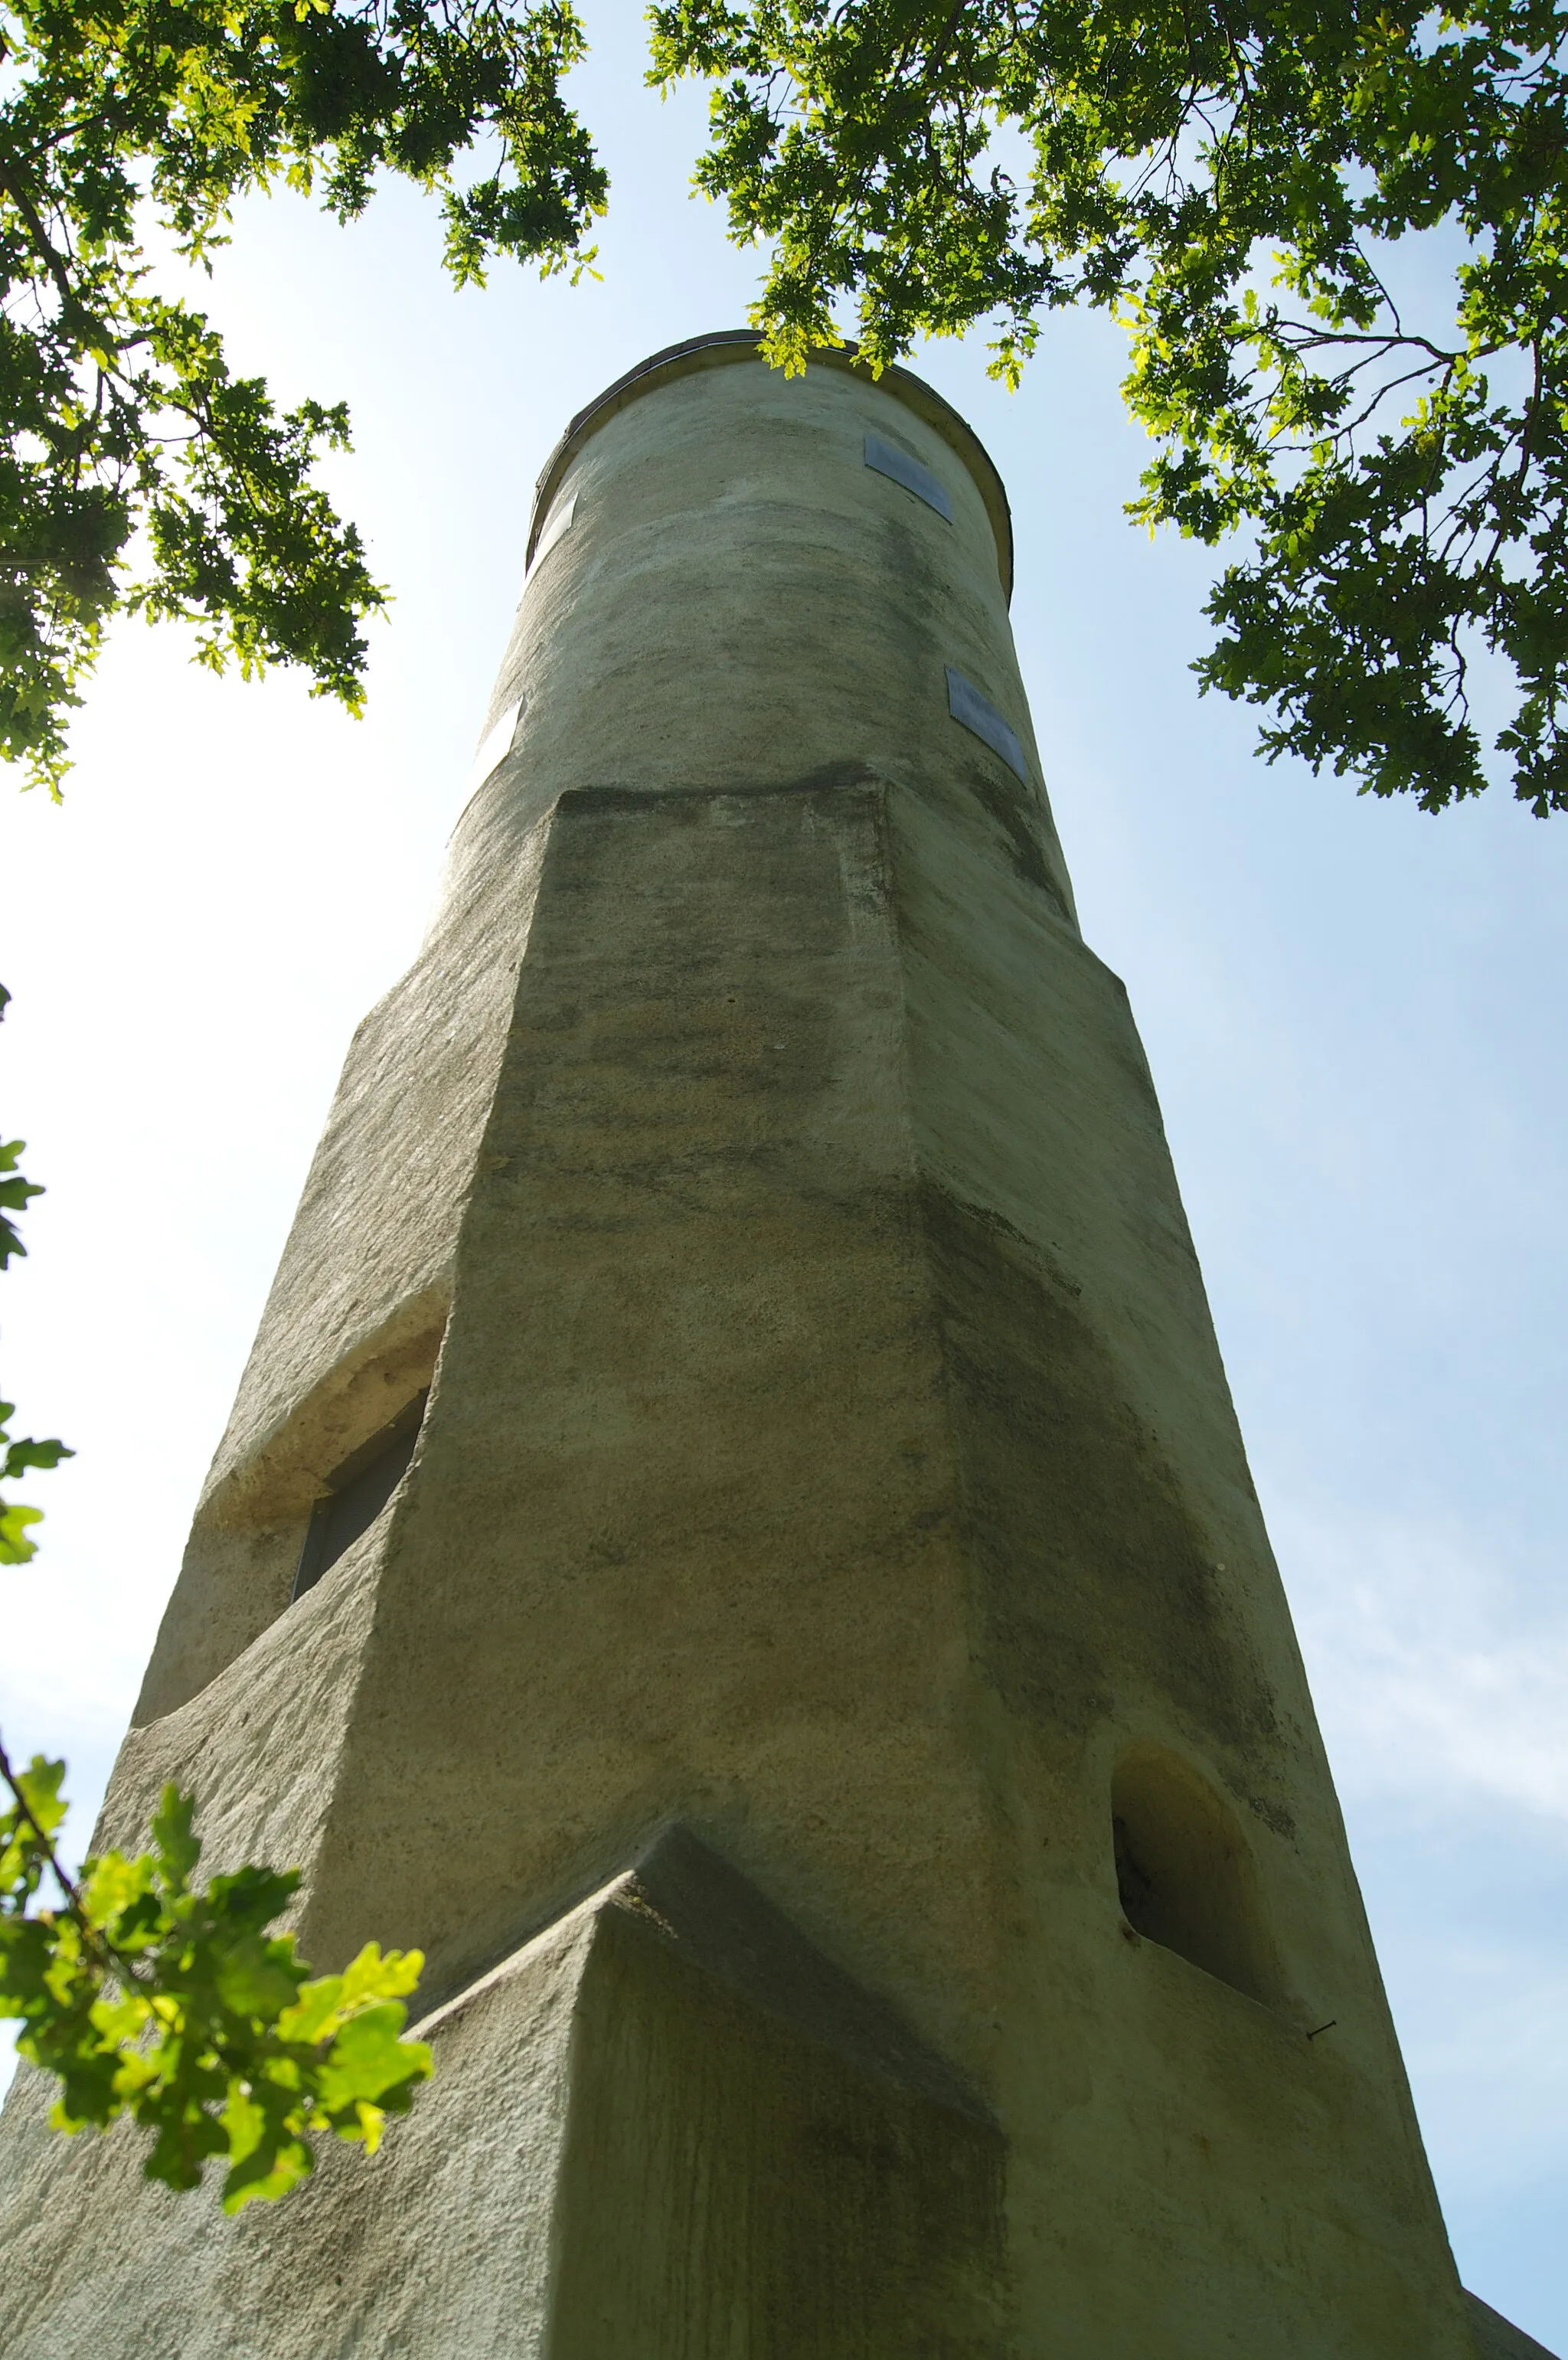 Photo showing: Water tower or look-out in Sandau, Landsberg am Lech, administrative district Landsberg am Lech